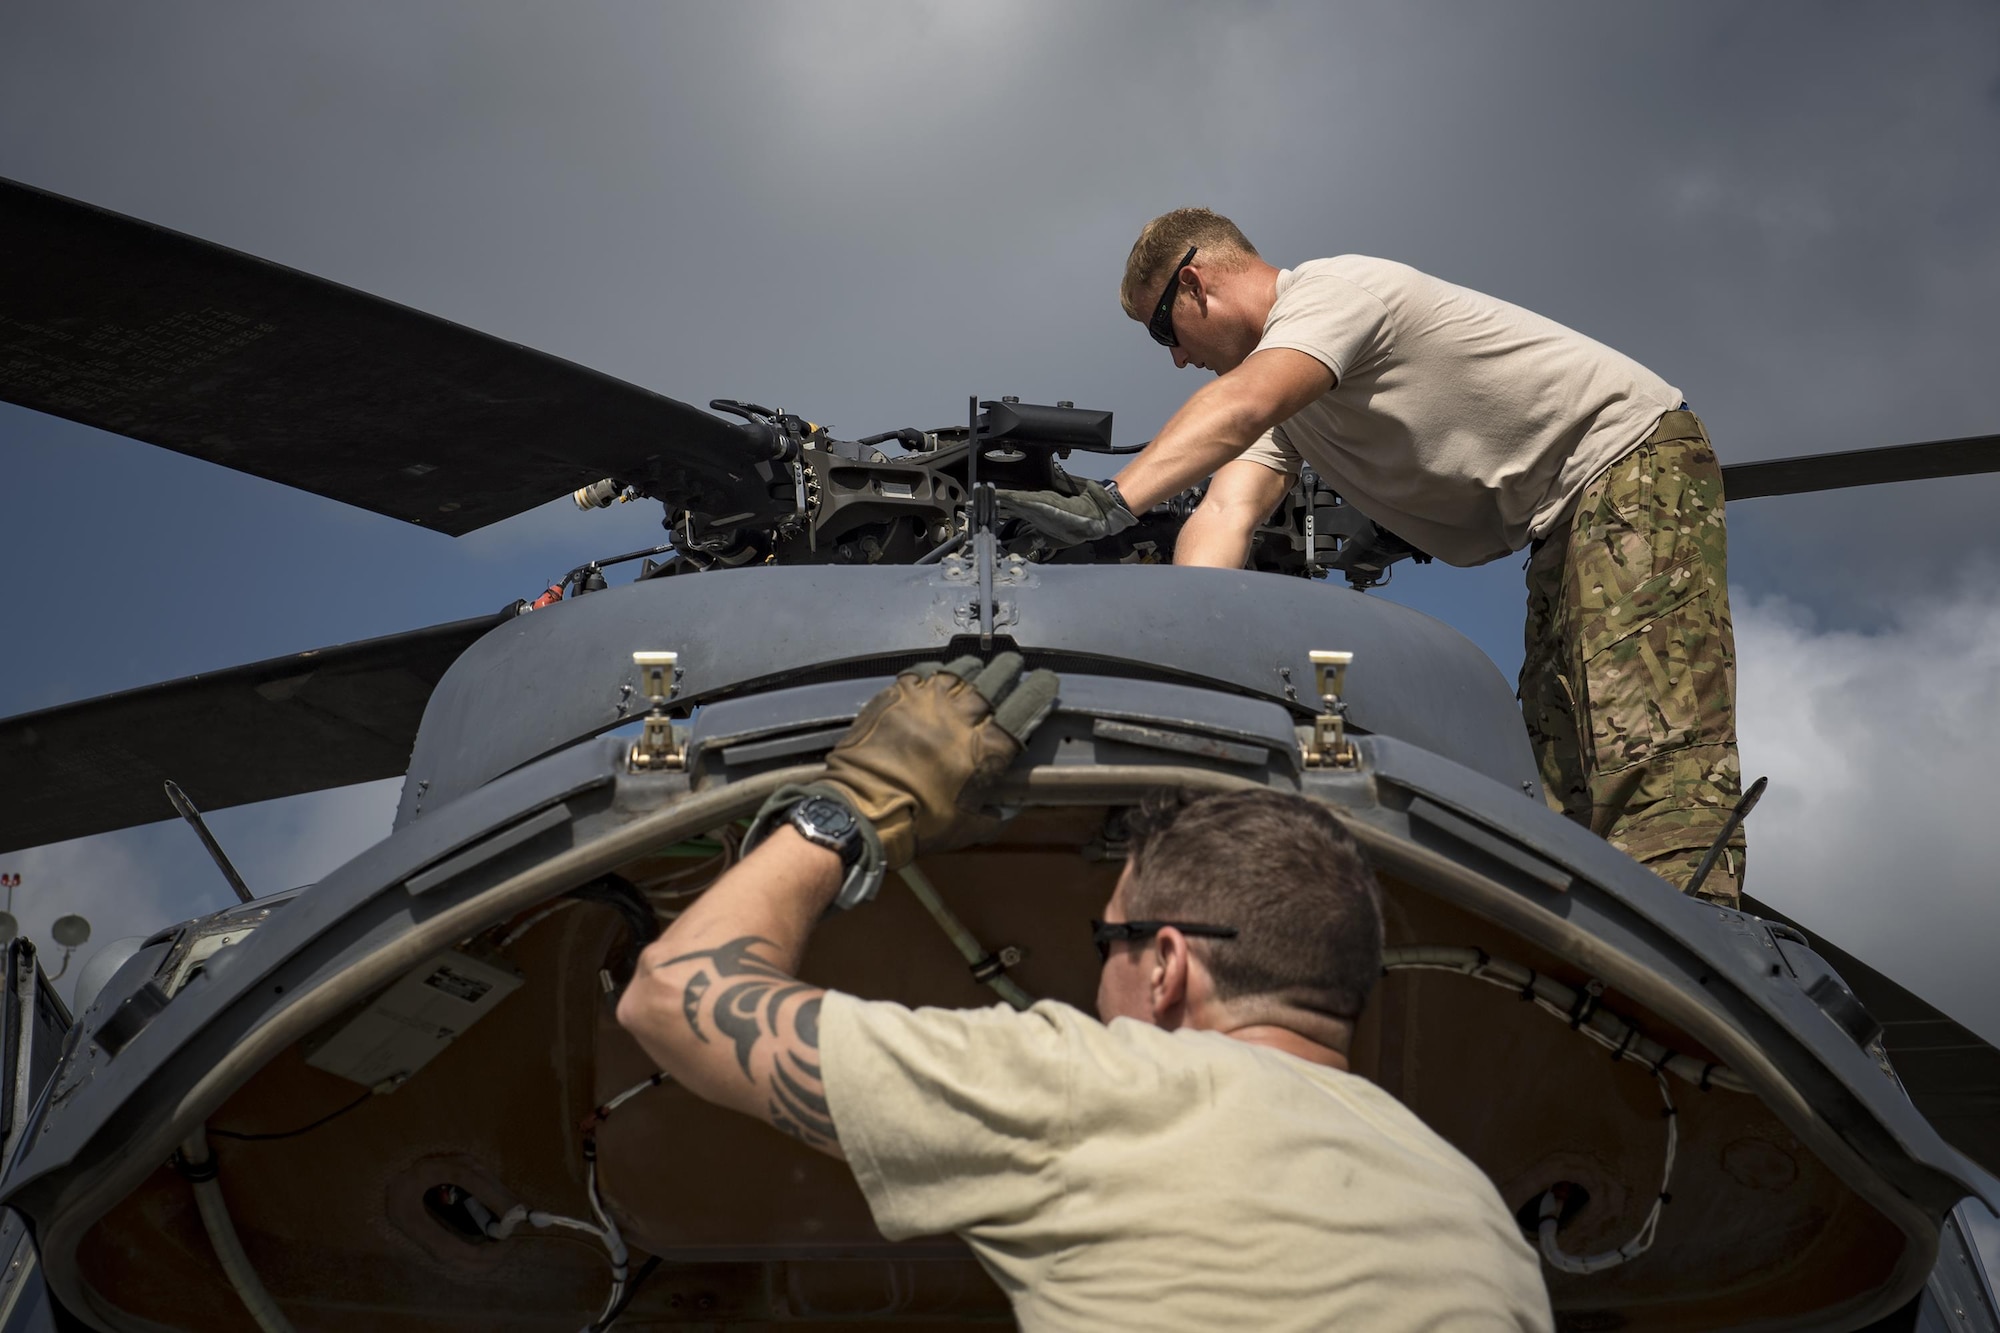 Master Sgt. Joshua Emerick, front, and Master Sgt. Zachary Ferguson, 41st Rescue Squadron, special missions aviators, inspect an HH-60G Pave Hawk prior to a sortie, Aug. 7, 2017, at Moody Air Force Base, Ga.